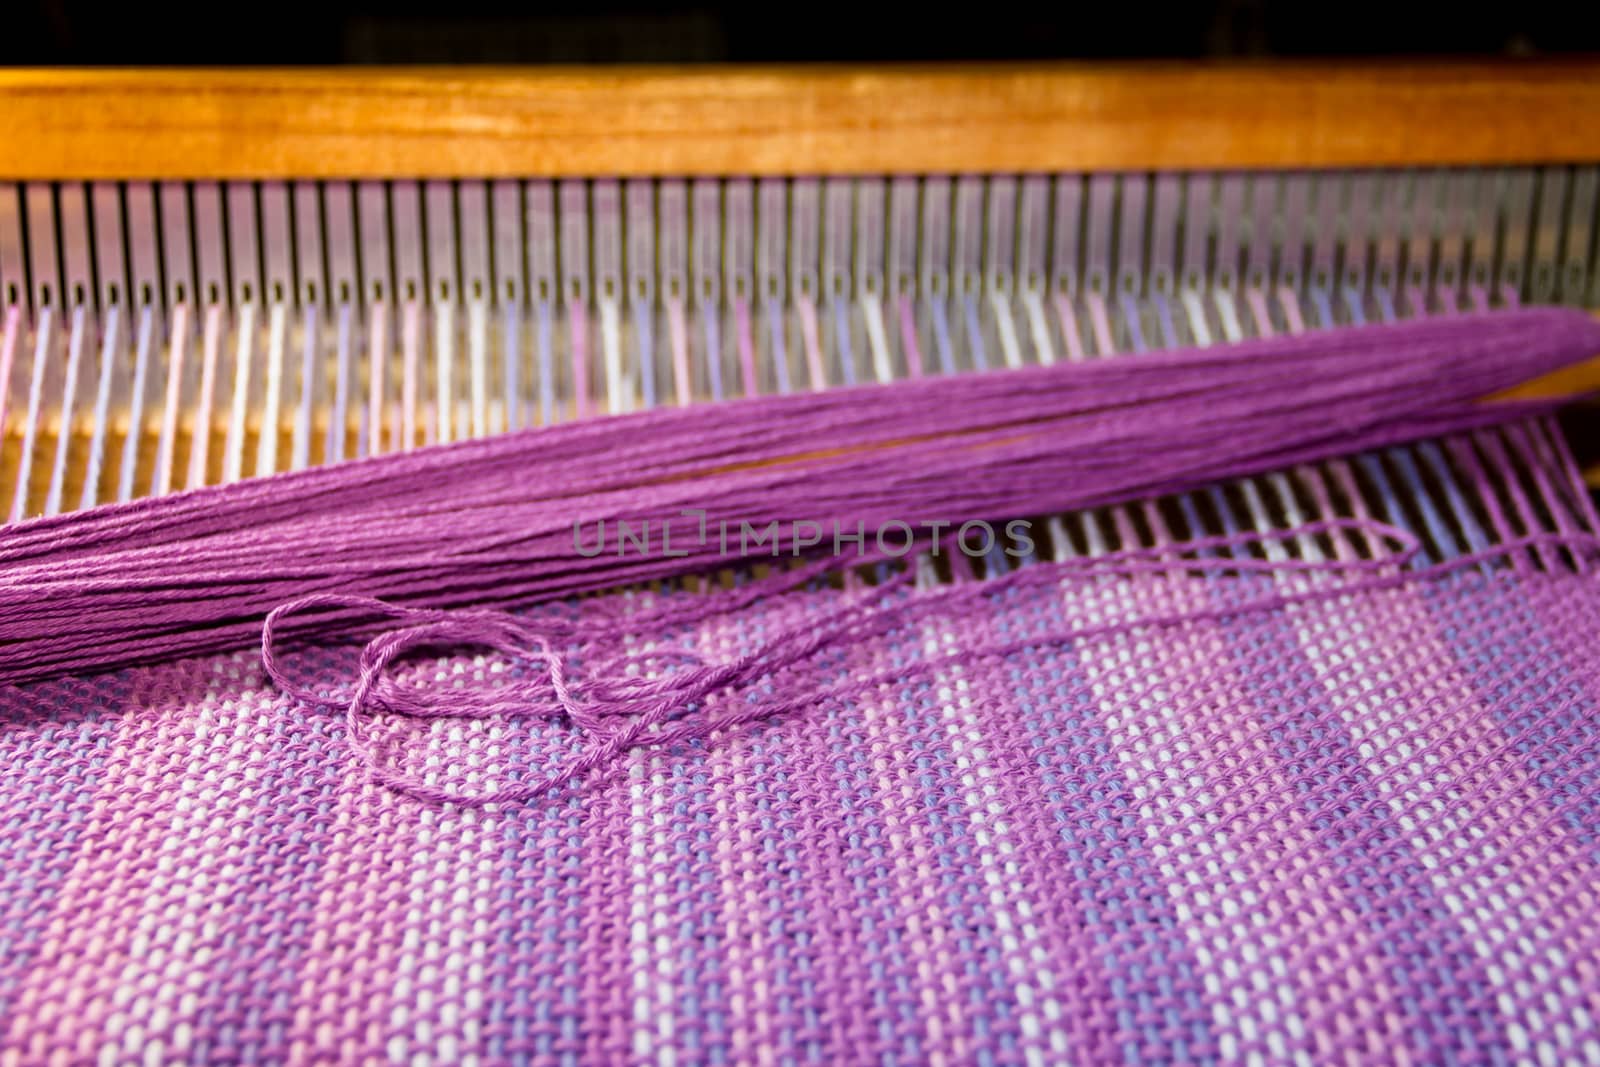 detail of fabric in comb loom with ultraviolet and lilac colors by GabrielaBertolini